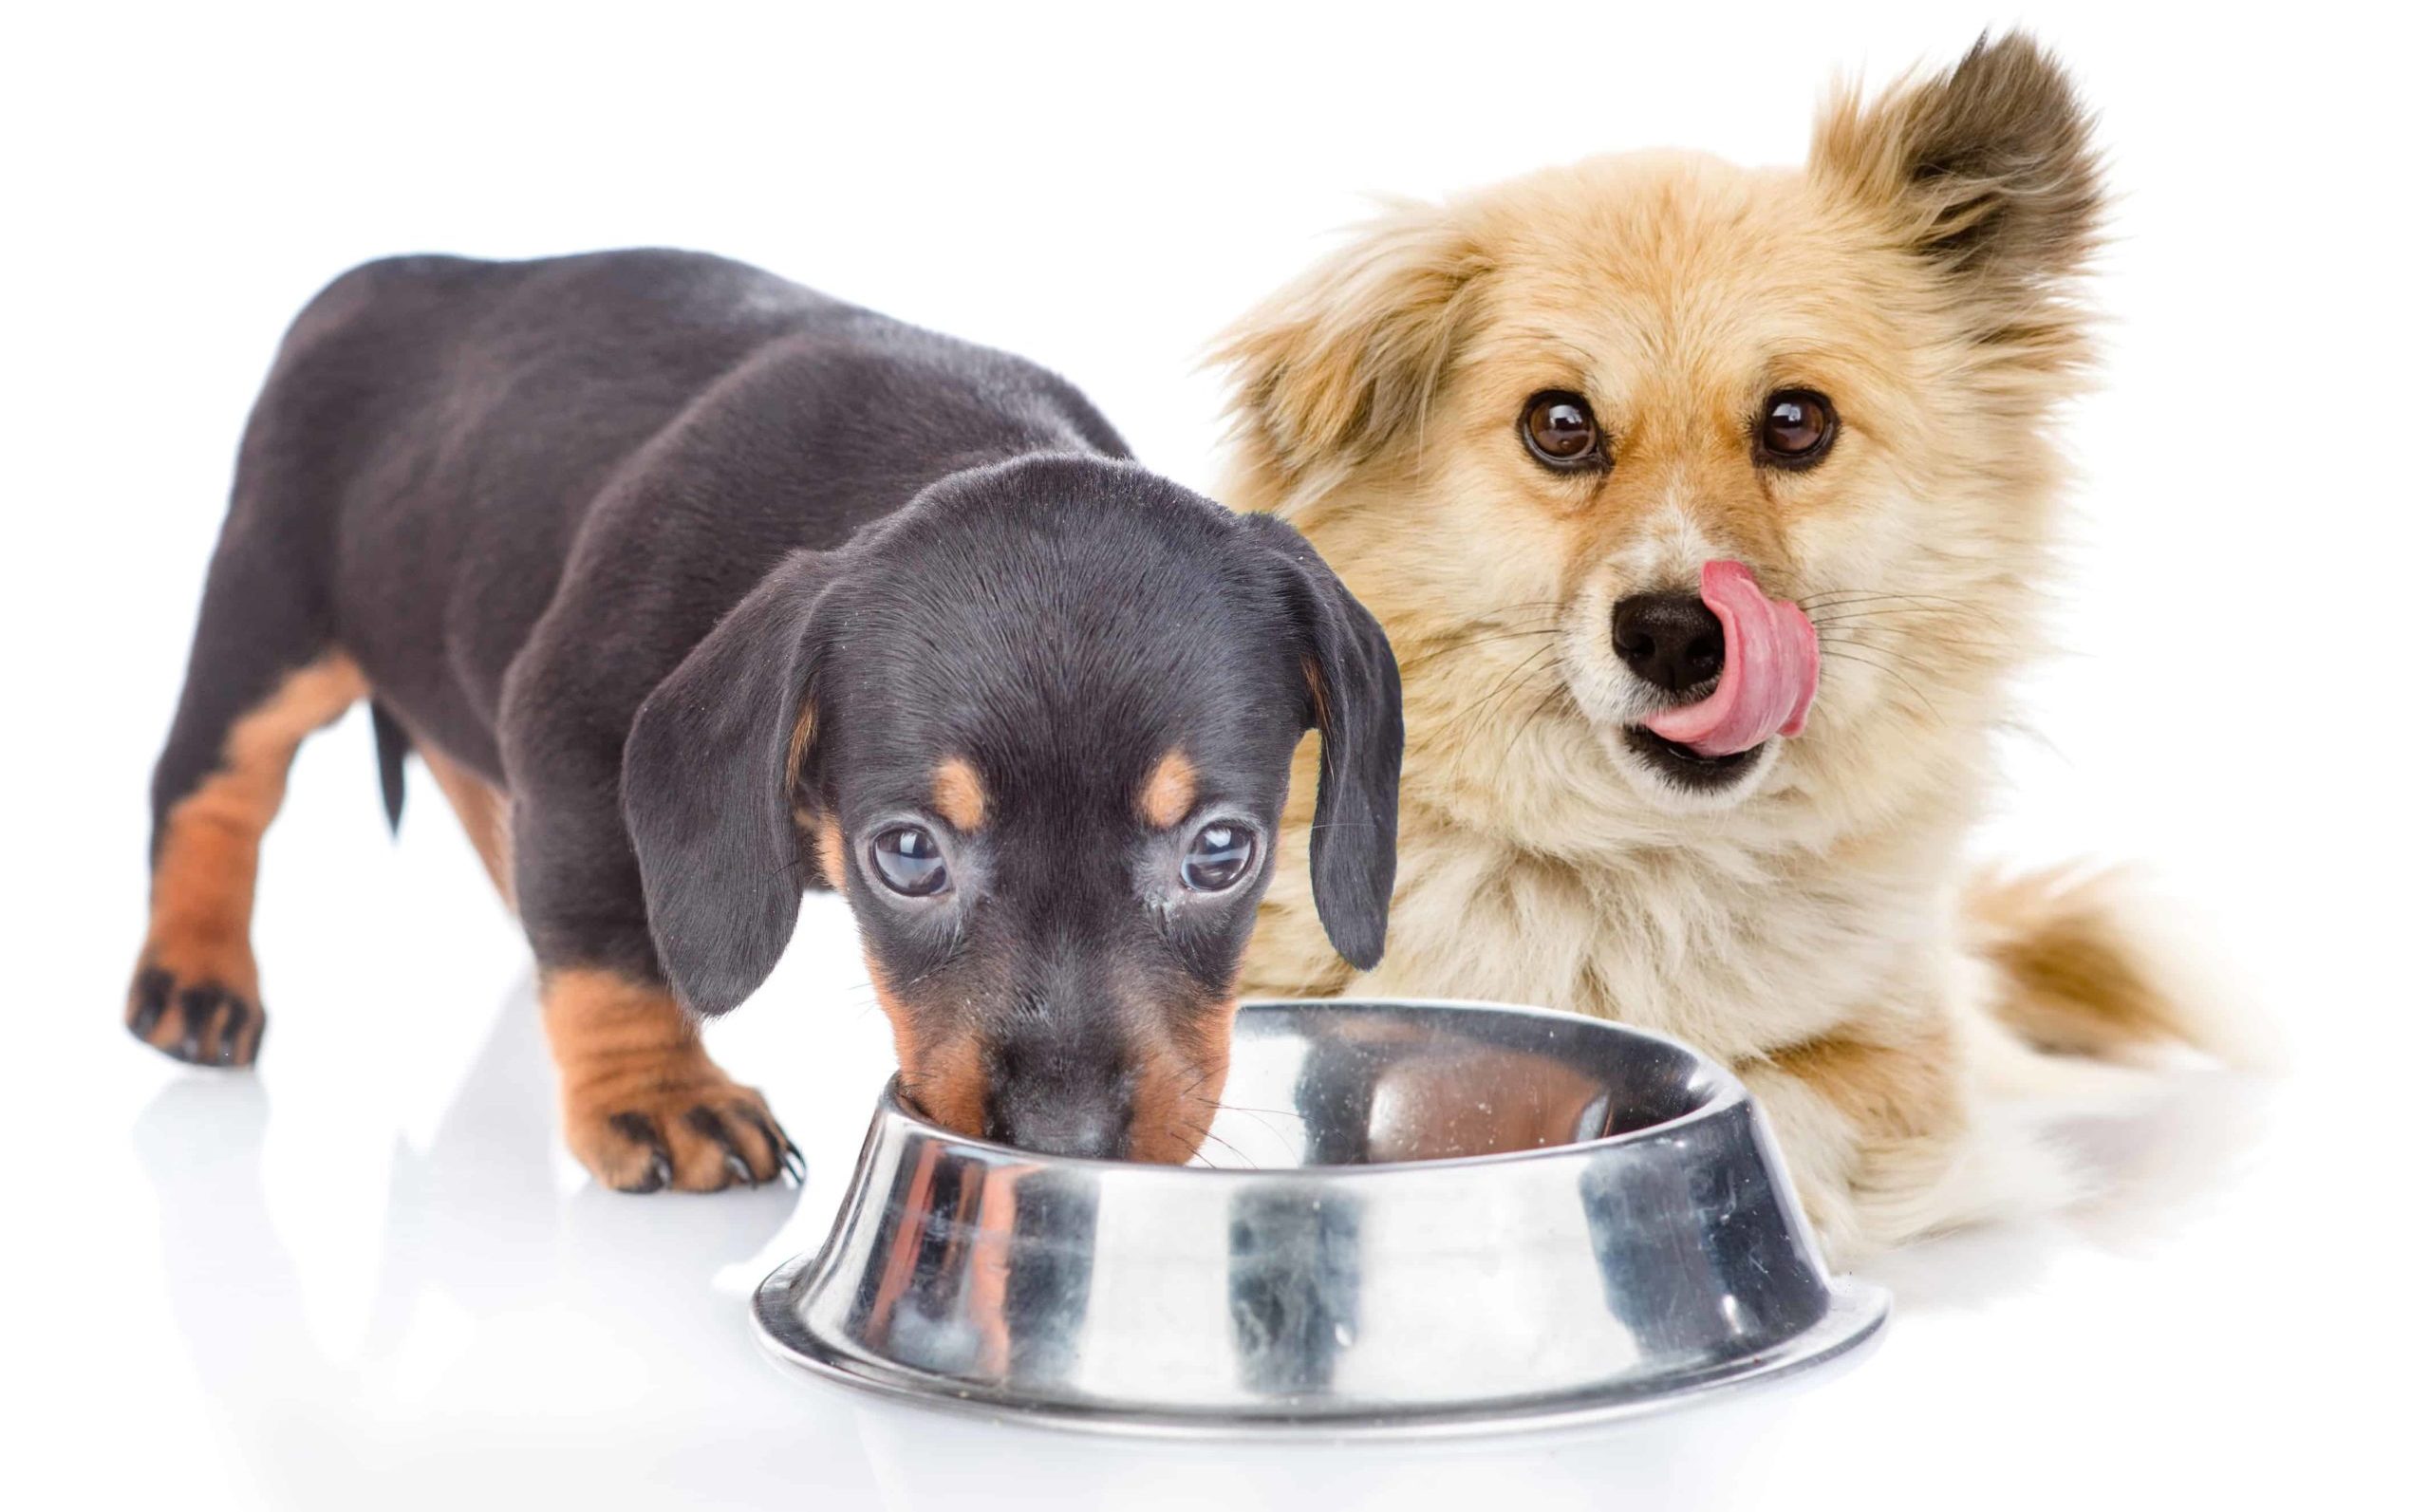 Two puppies eat from the same food bowl. Some dogs don't chew because they remember competing for food with their littermates or other dogs at a shelter. If you have more than one dog, consider using separate bowls or even feeding the dogs in different rooms.